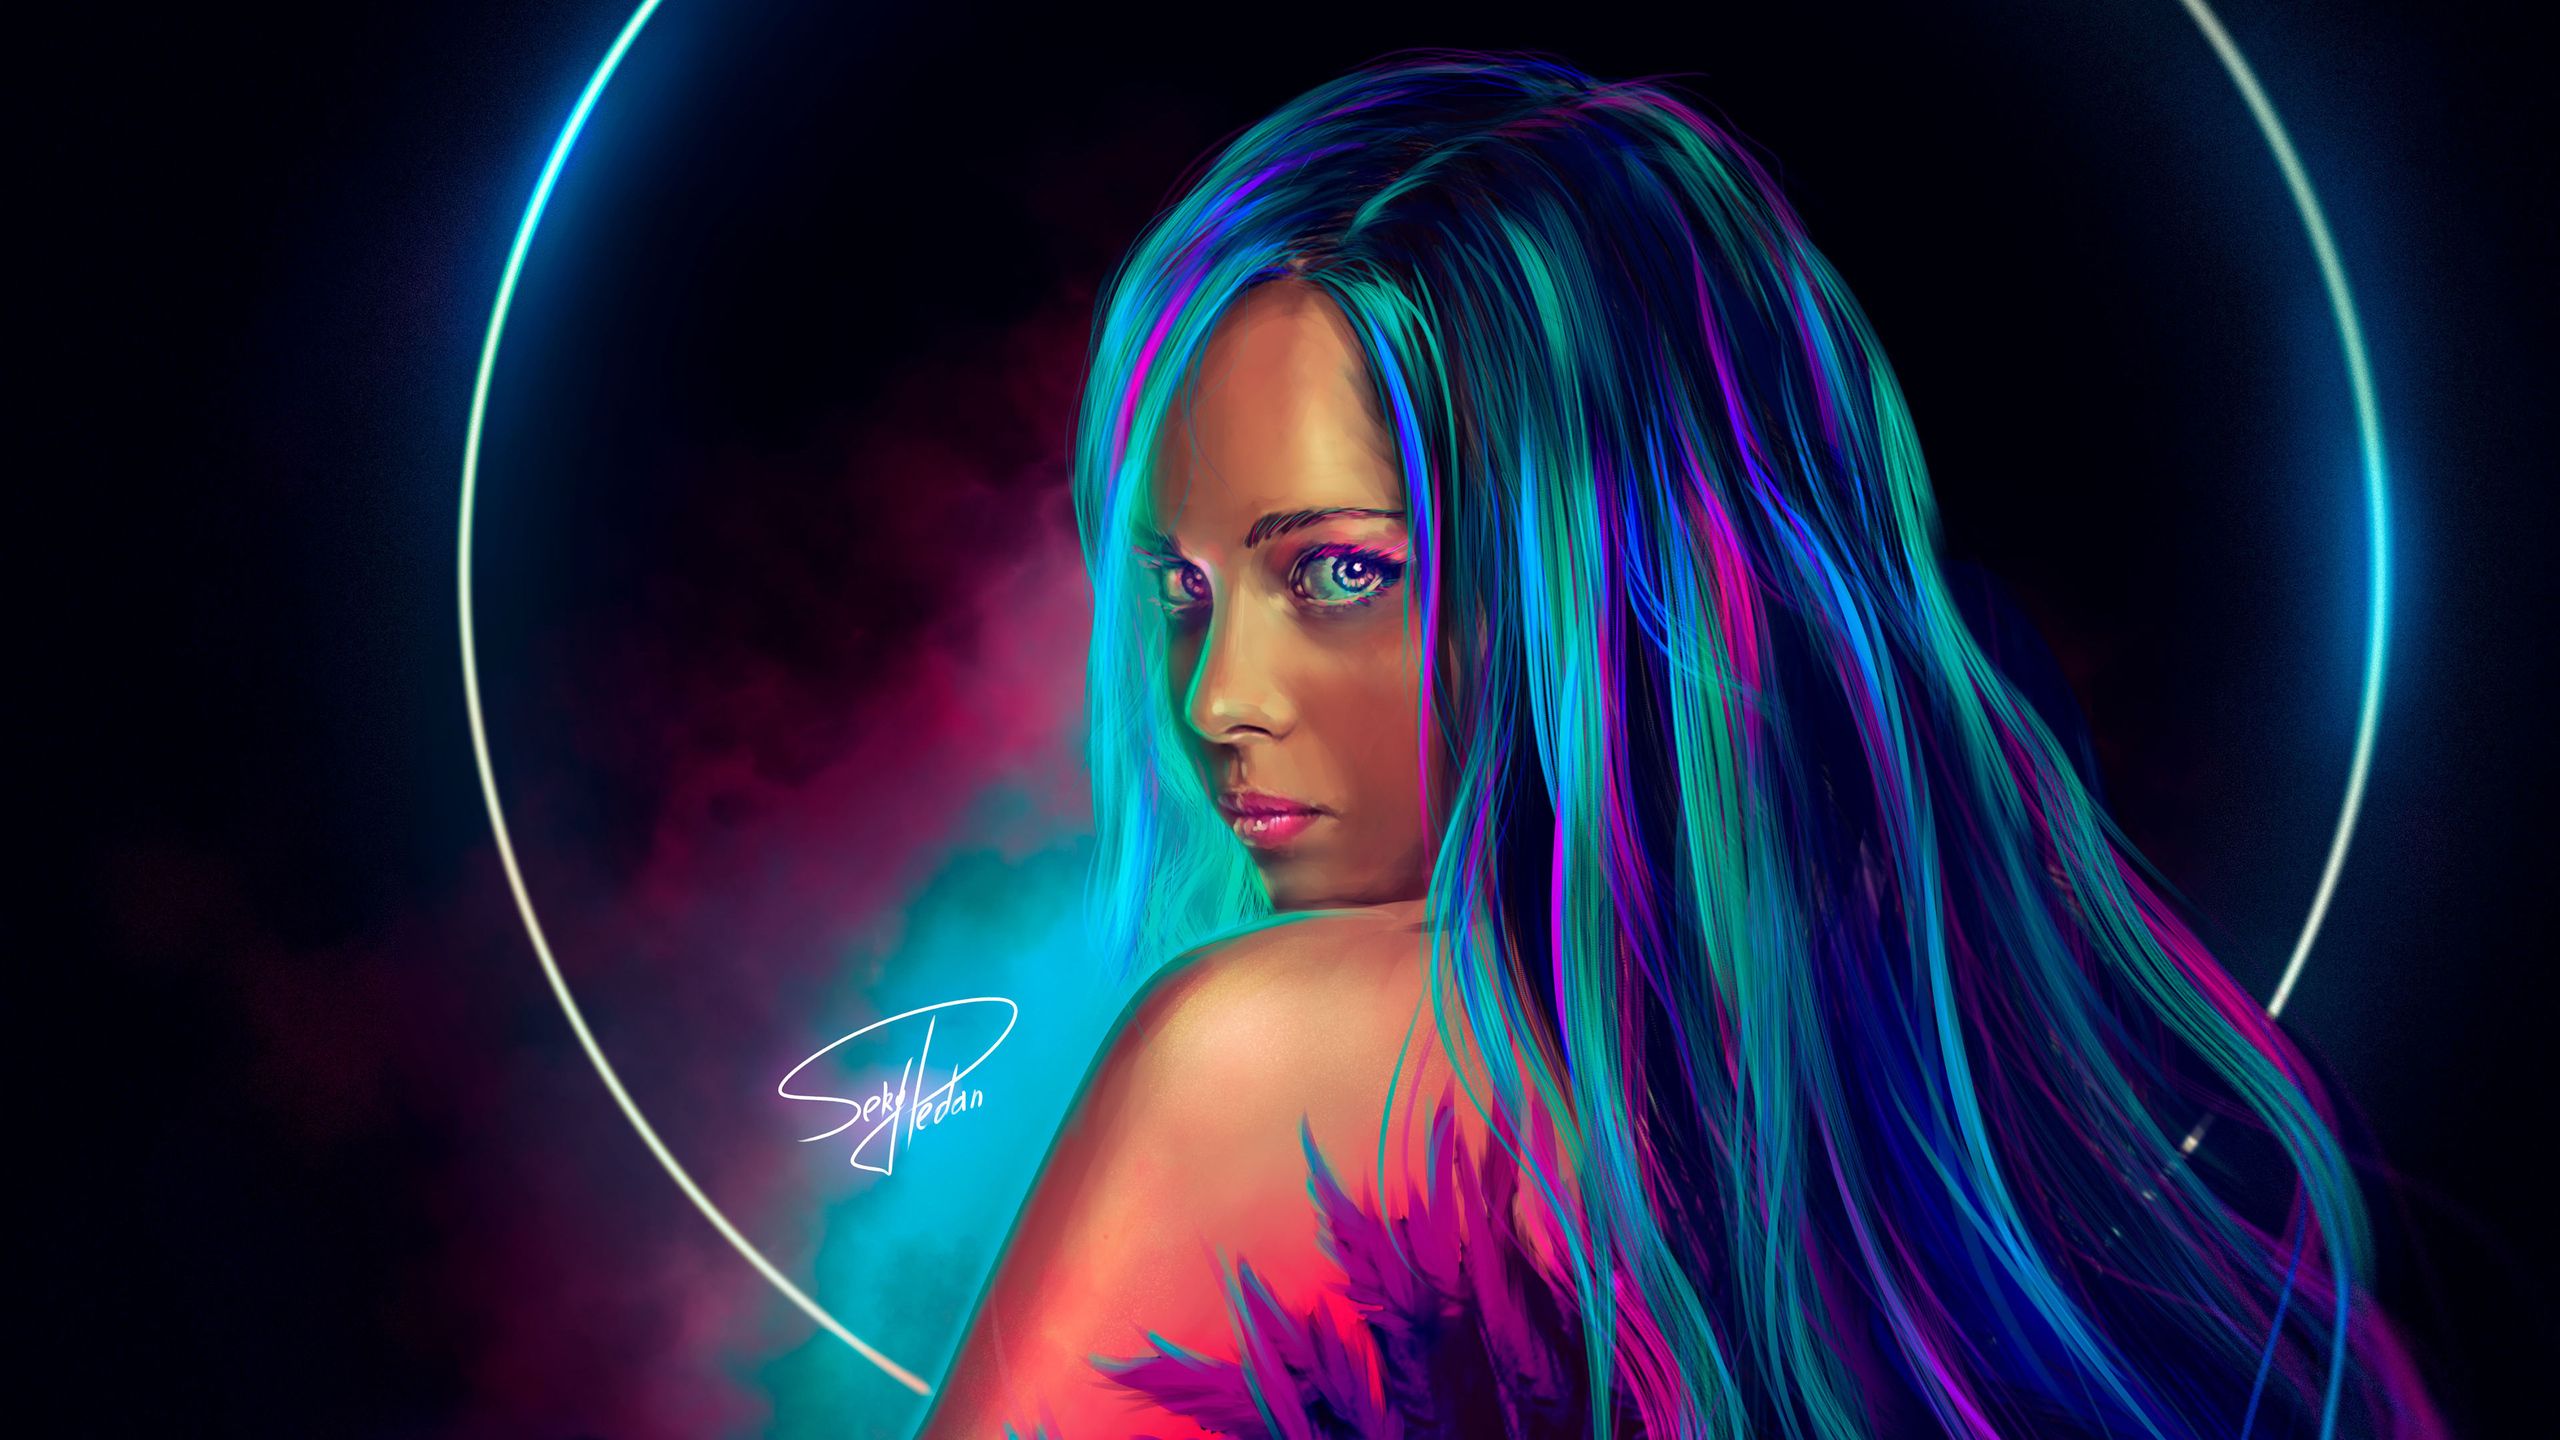 Neon Girl Digital Art 1440P Resolution HD 4k Wallpaper, Image, Background, Photo and Picture